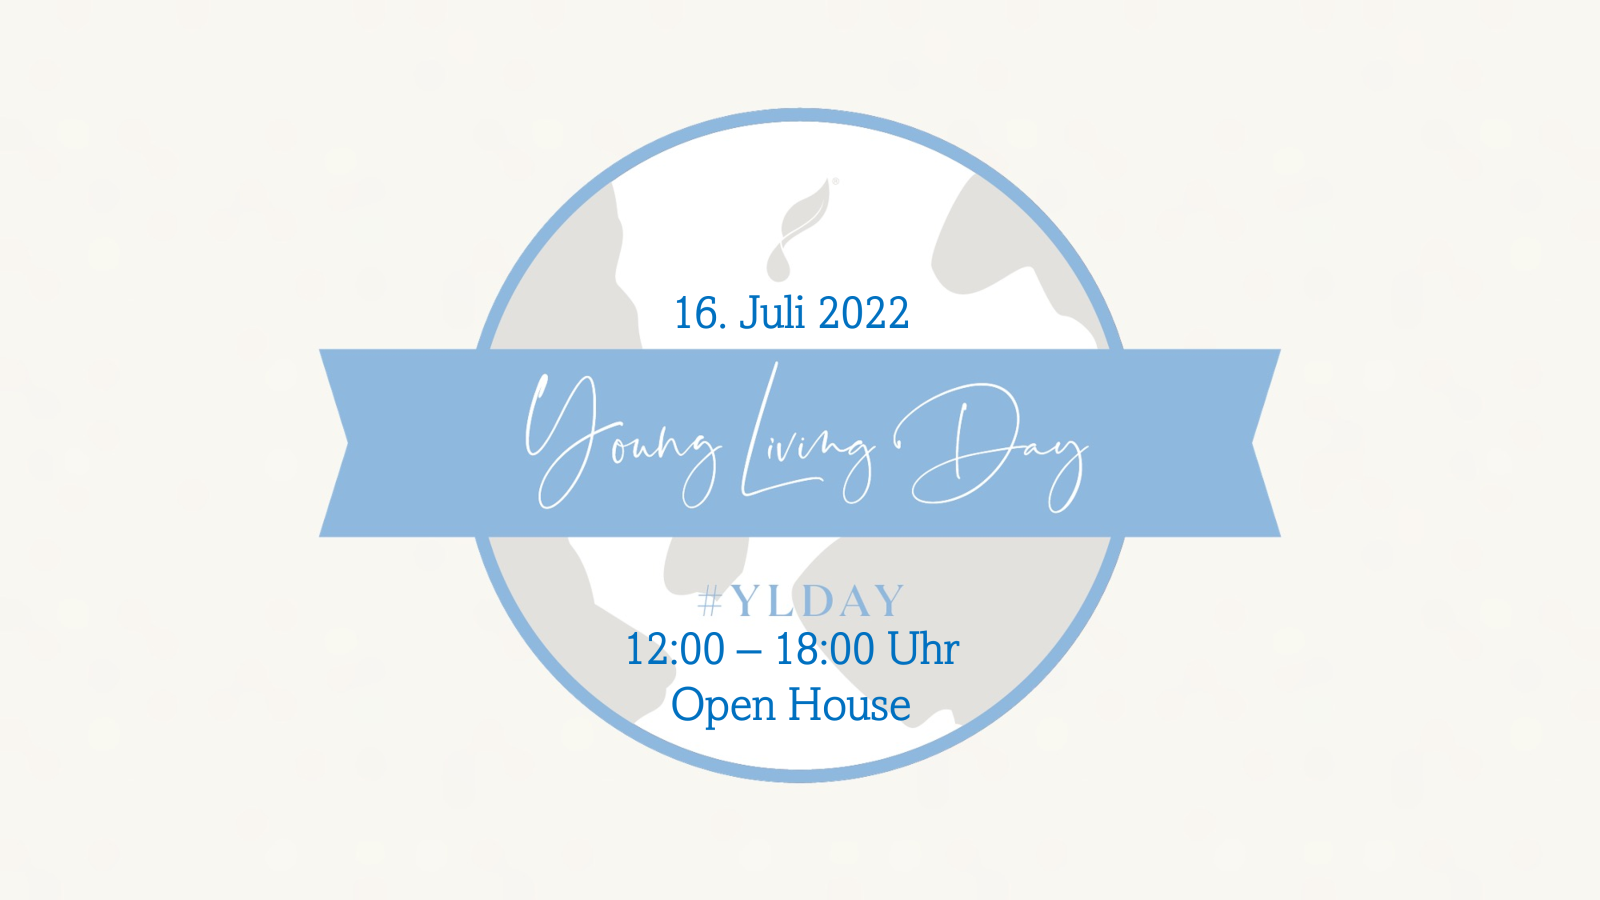 Young Living Day - Open House